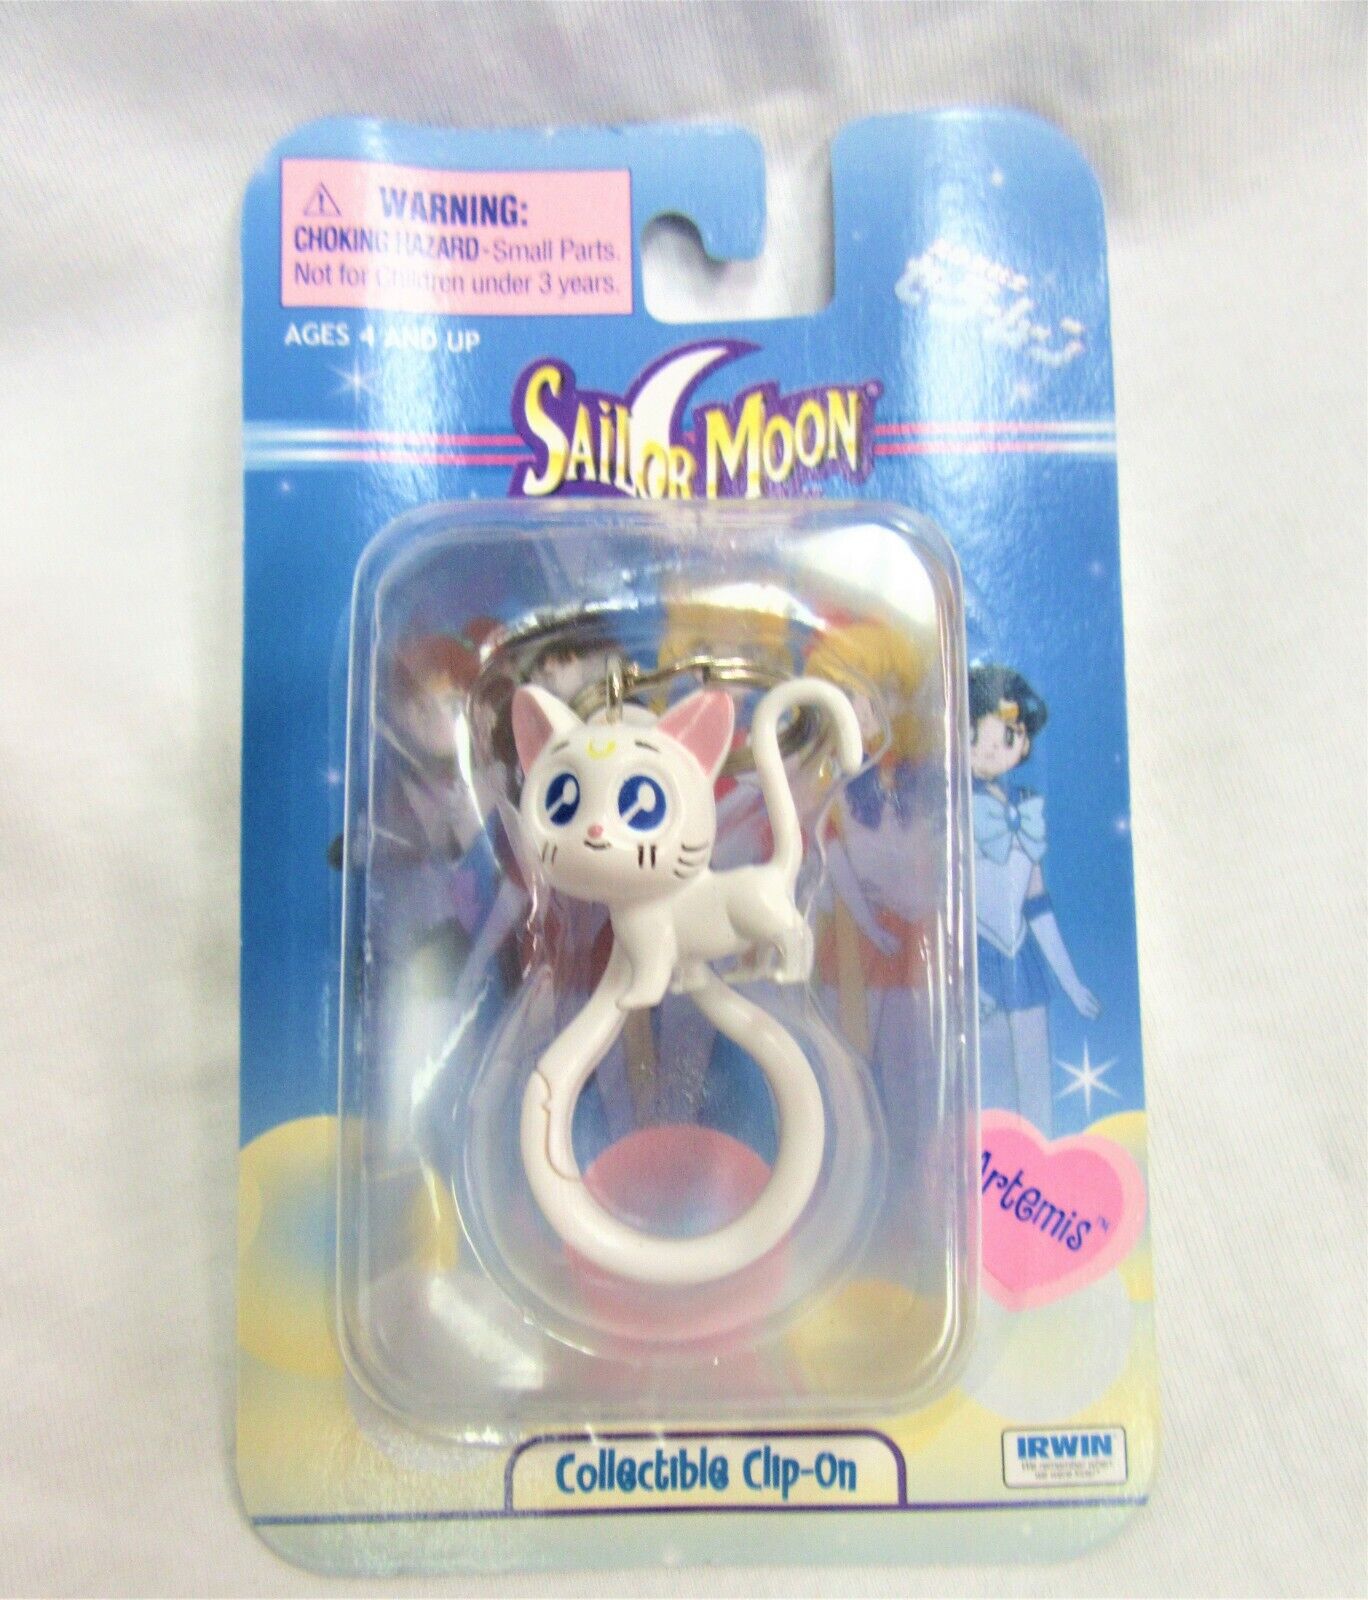 Vintage Collectible Toy, Sailor Moon Figural Collectible Clip-On, Artemis